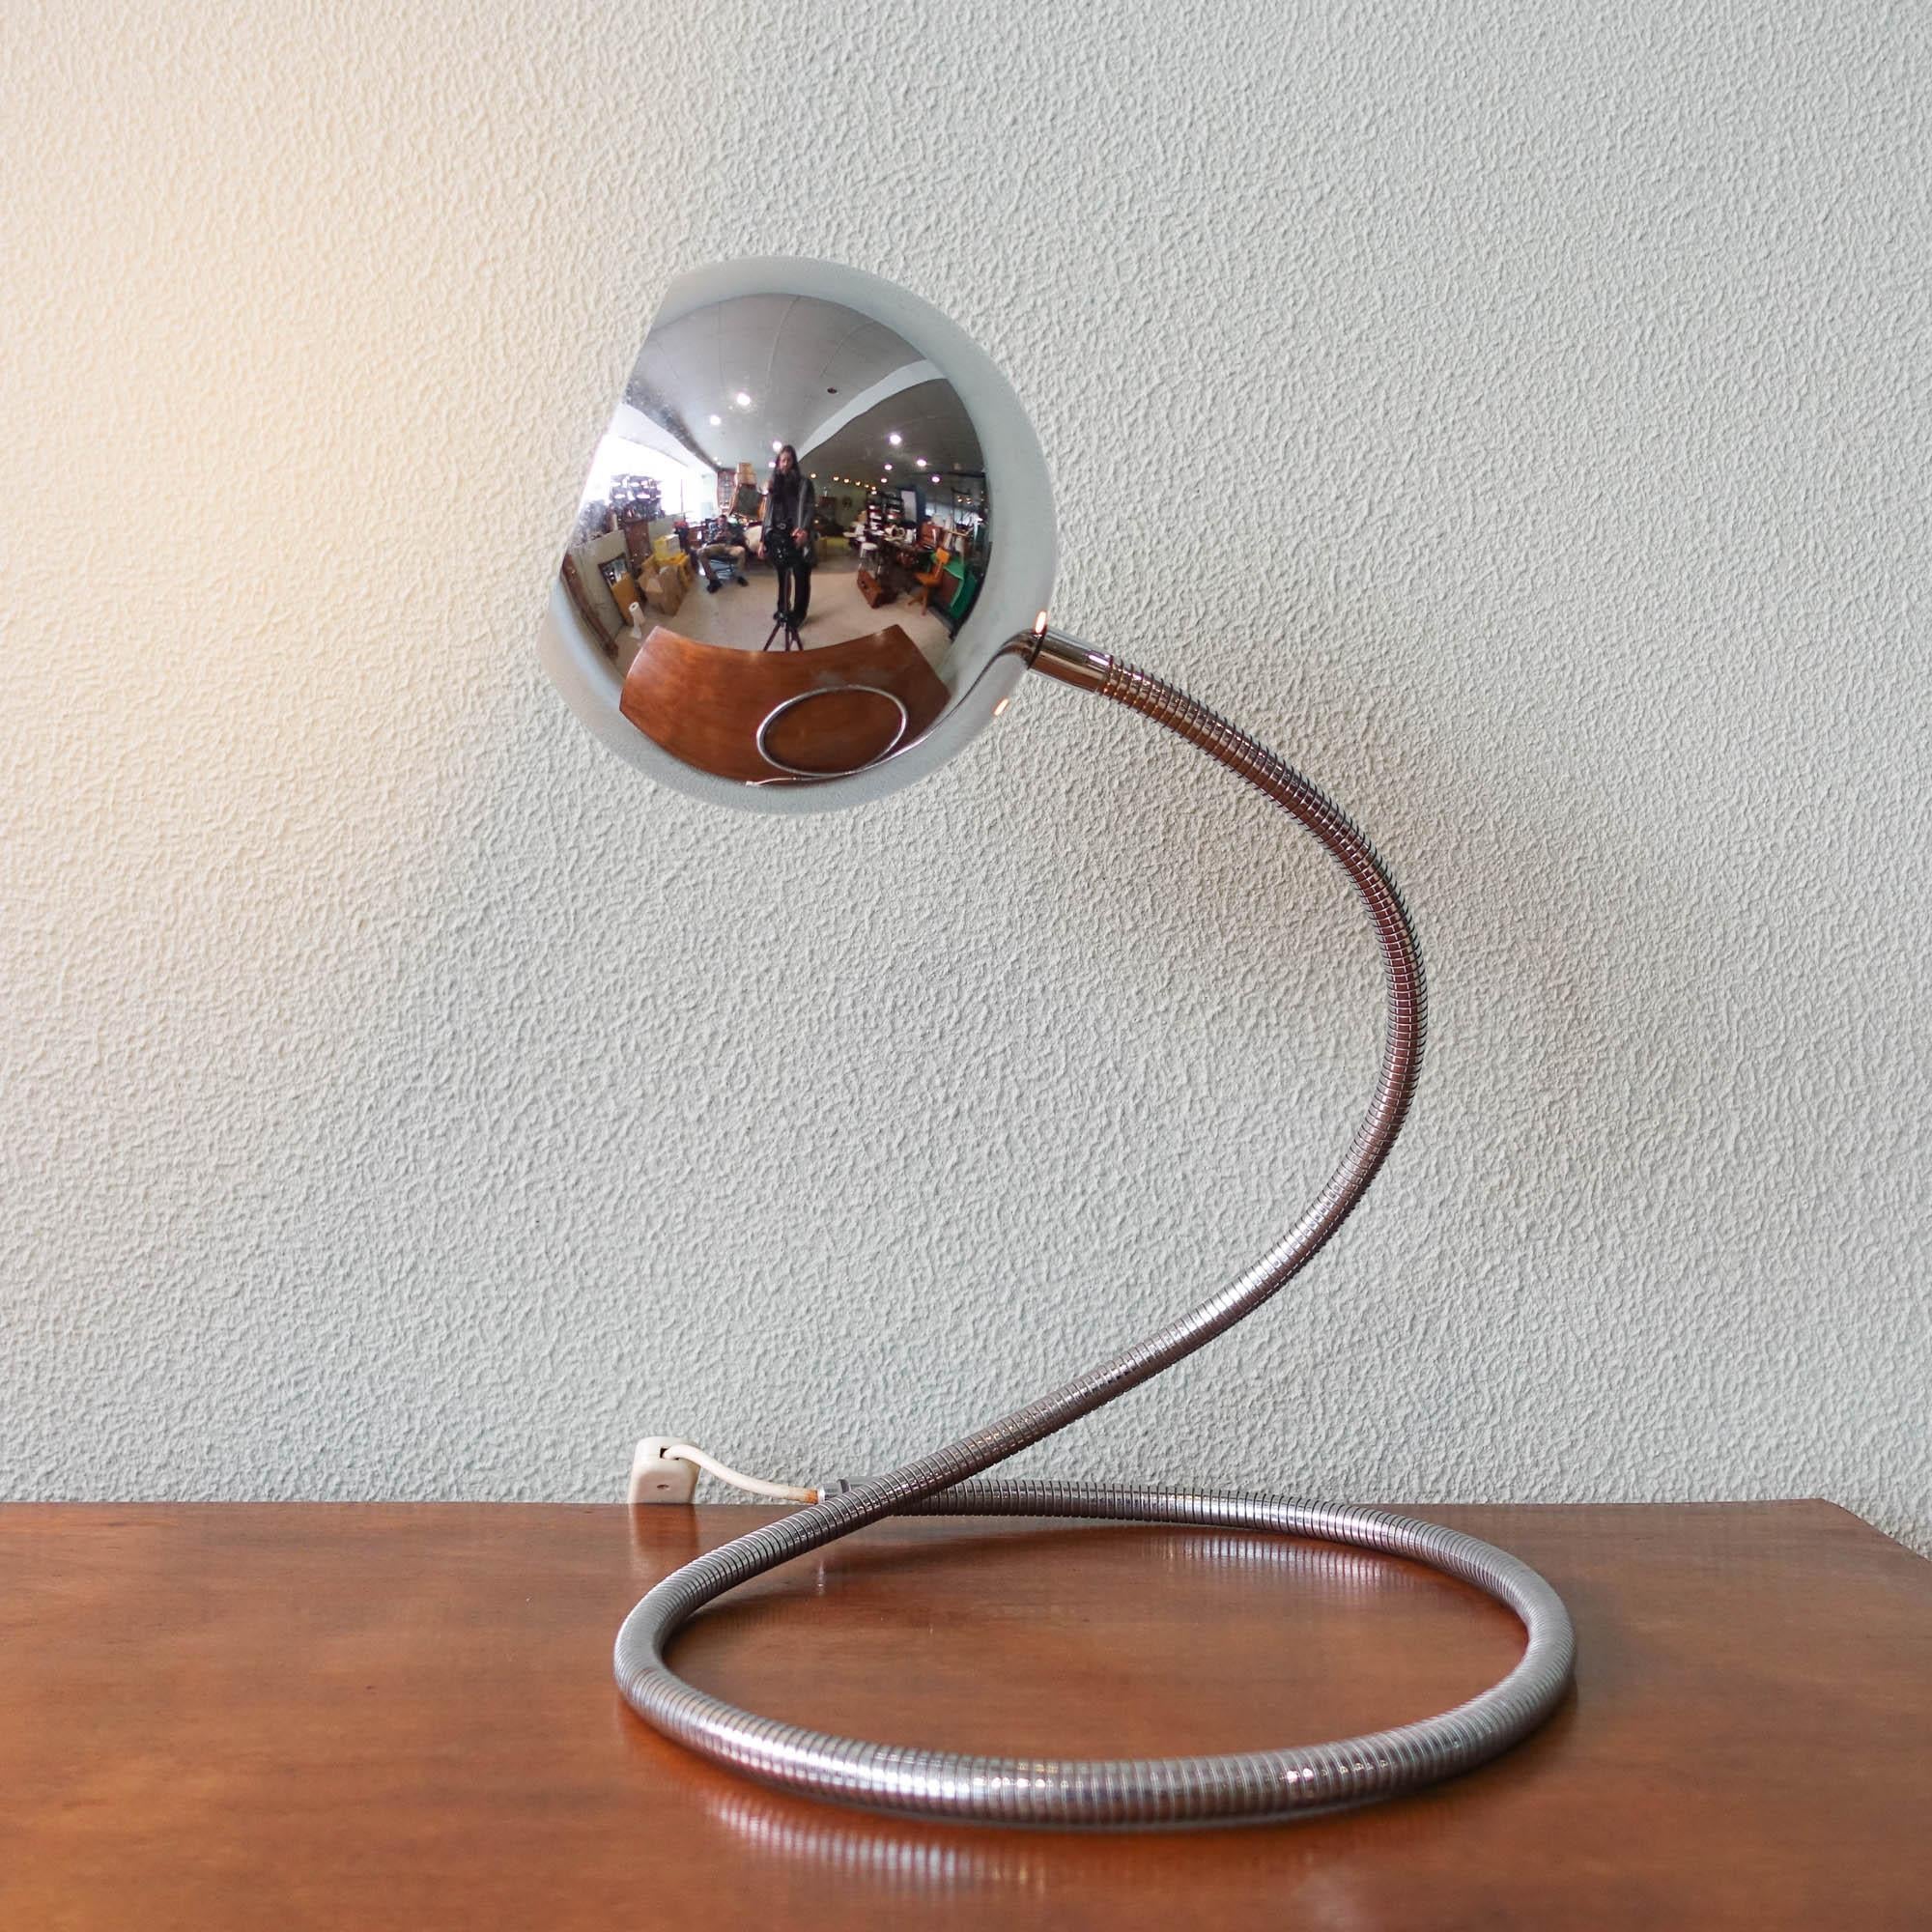 This table lamp was designed by Goffredo Reggiani for Reggiani during the 1970's. This is a rare Italian mid-century chrome table lamp, named after 